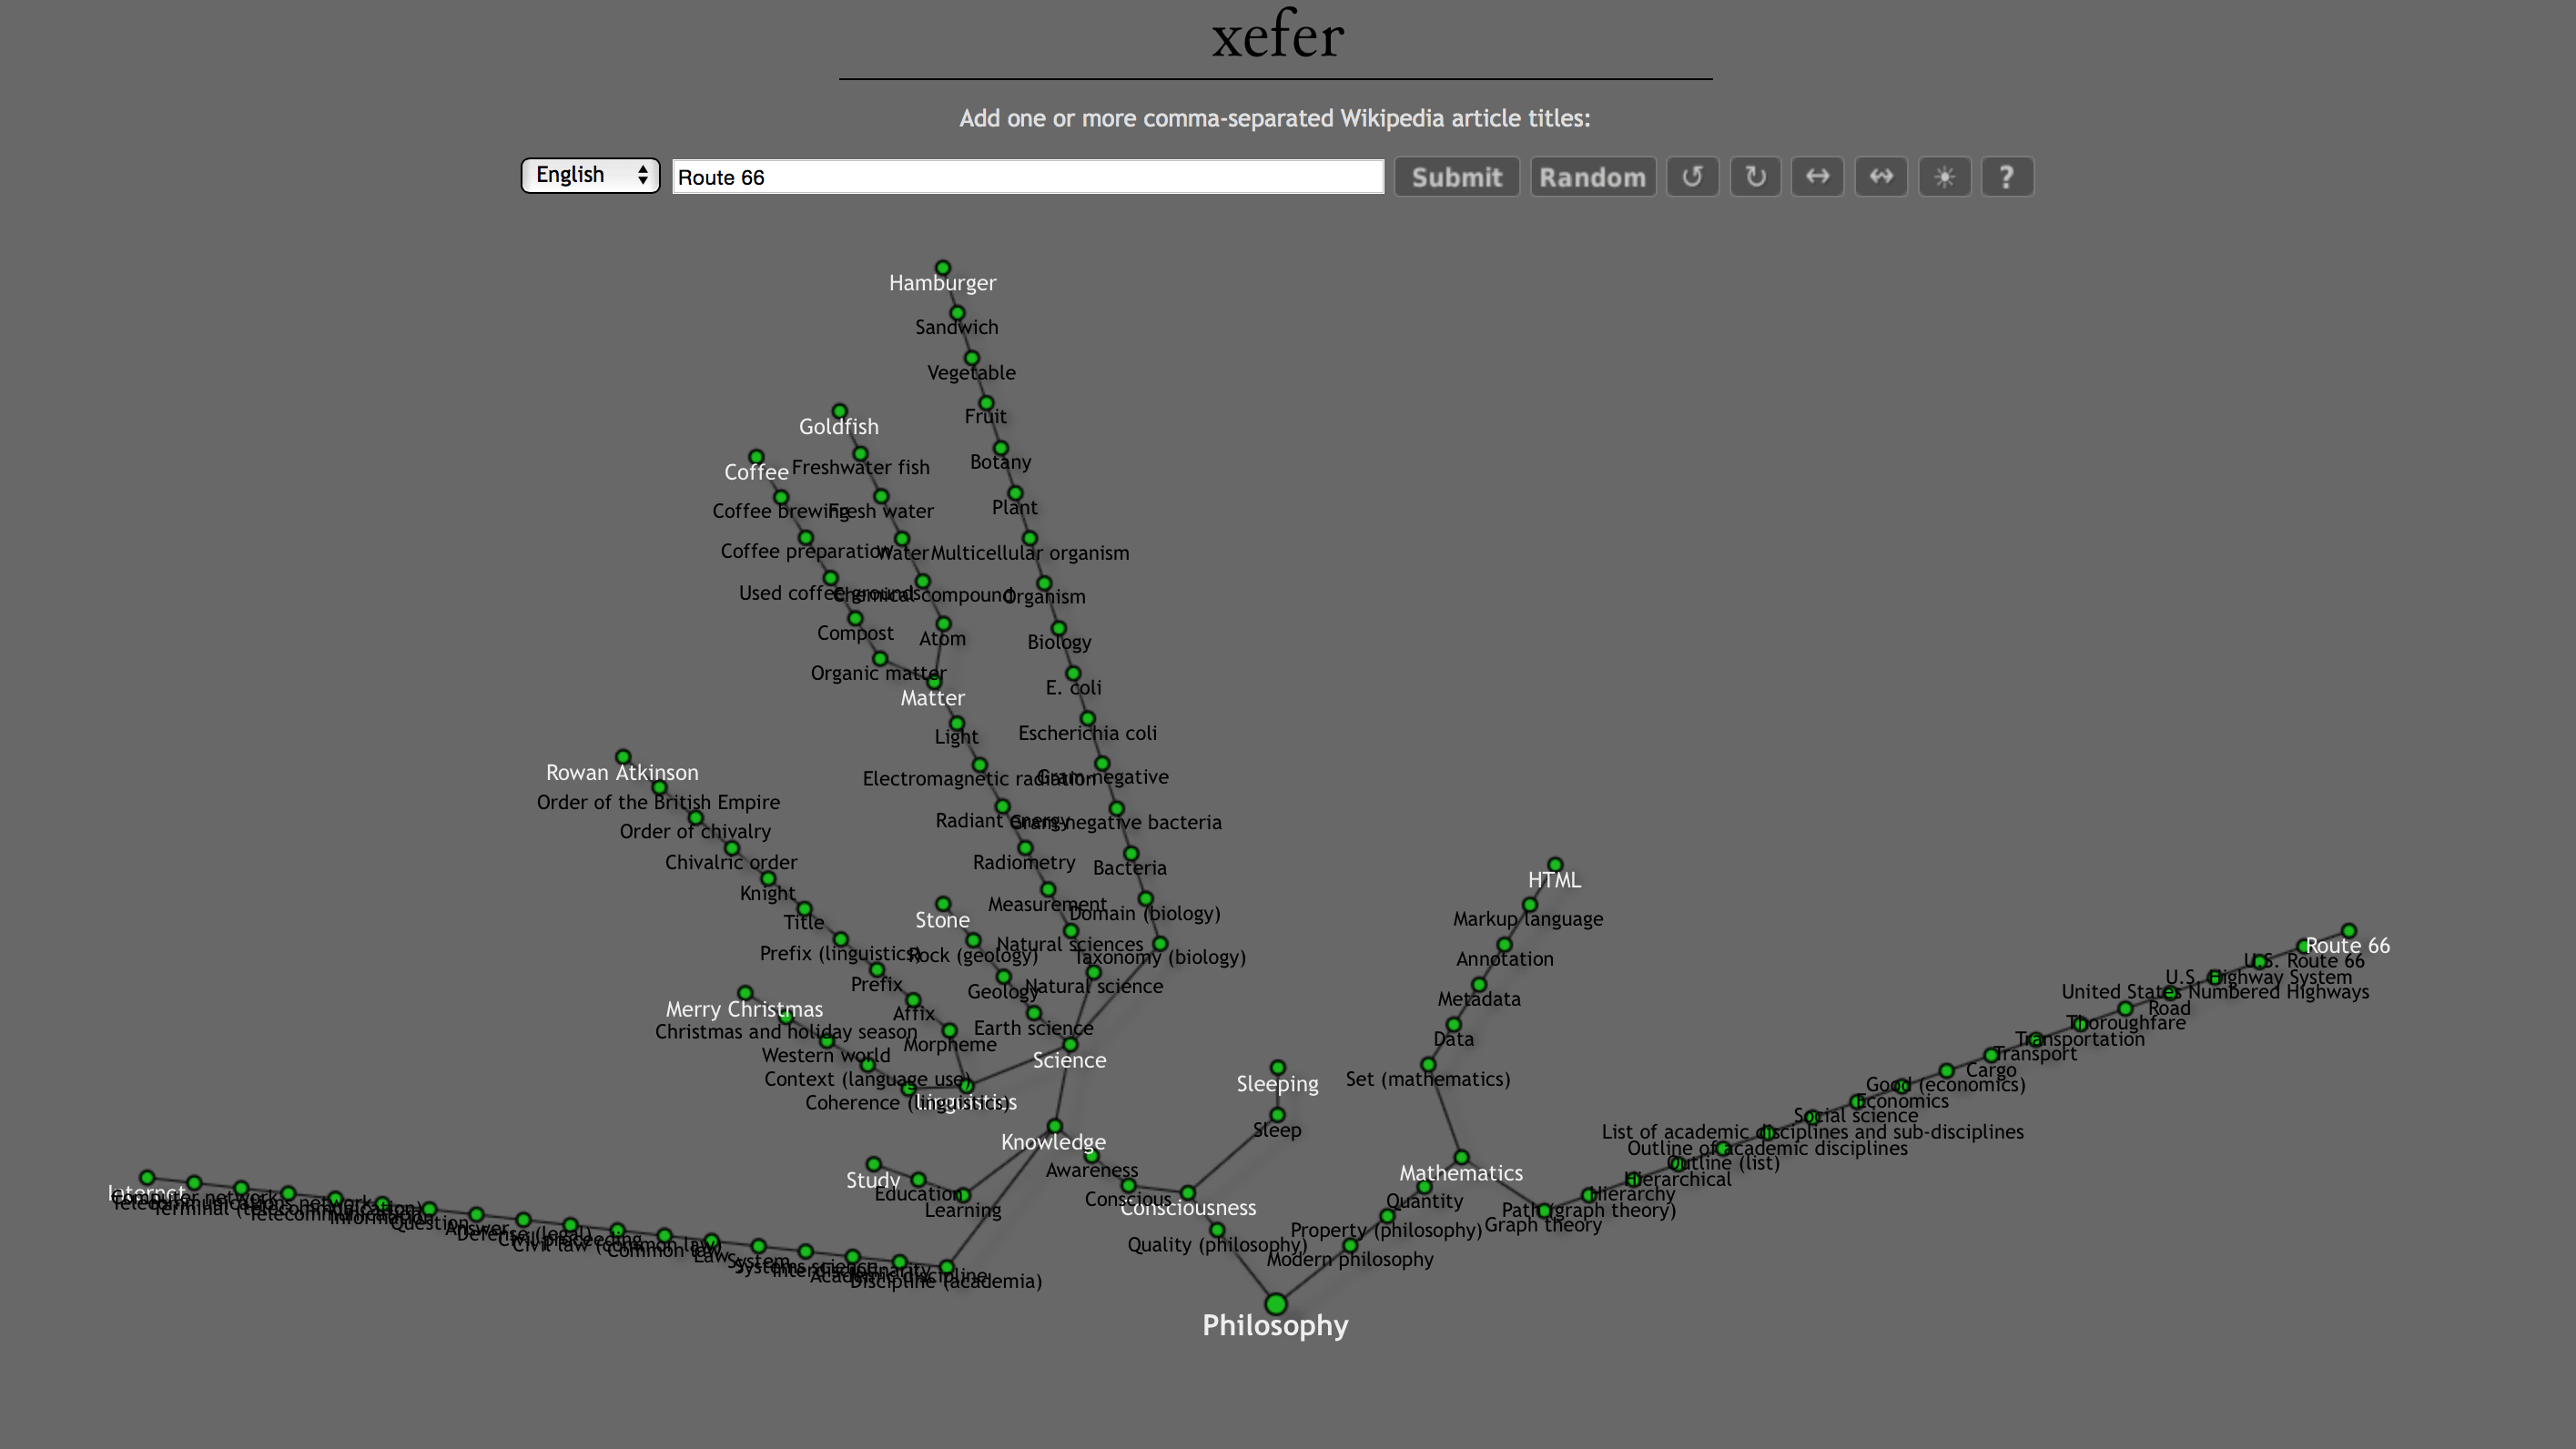 Visual of Every Wikipedia Article Leads to Philosophy